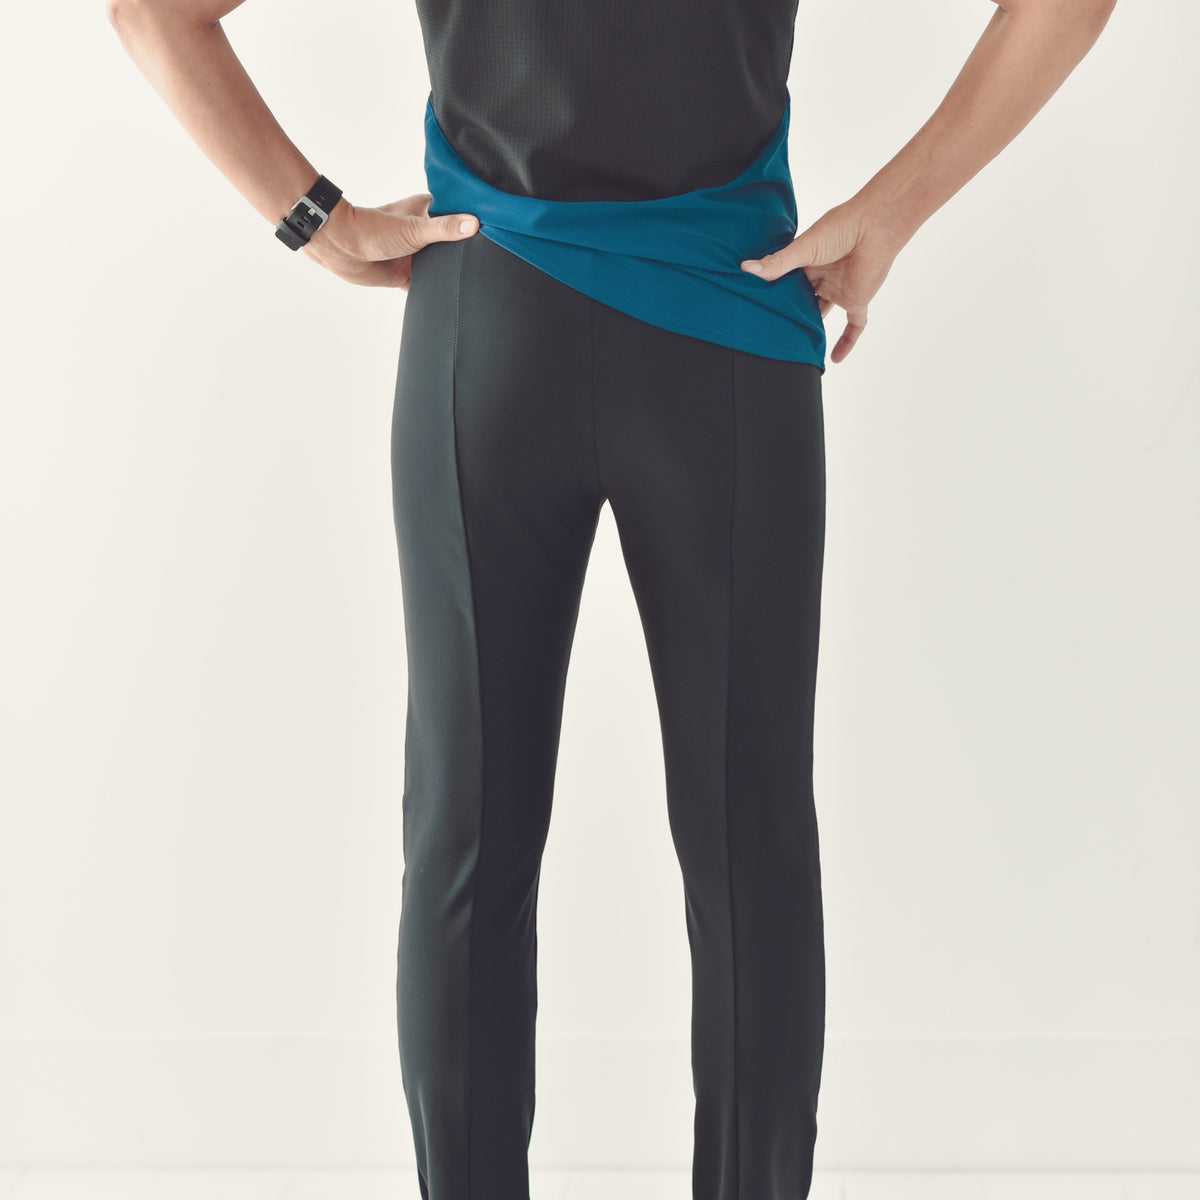 black golf pants with flatter back seam in any size